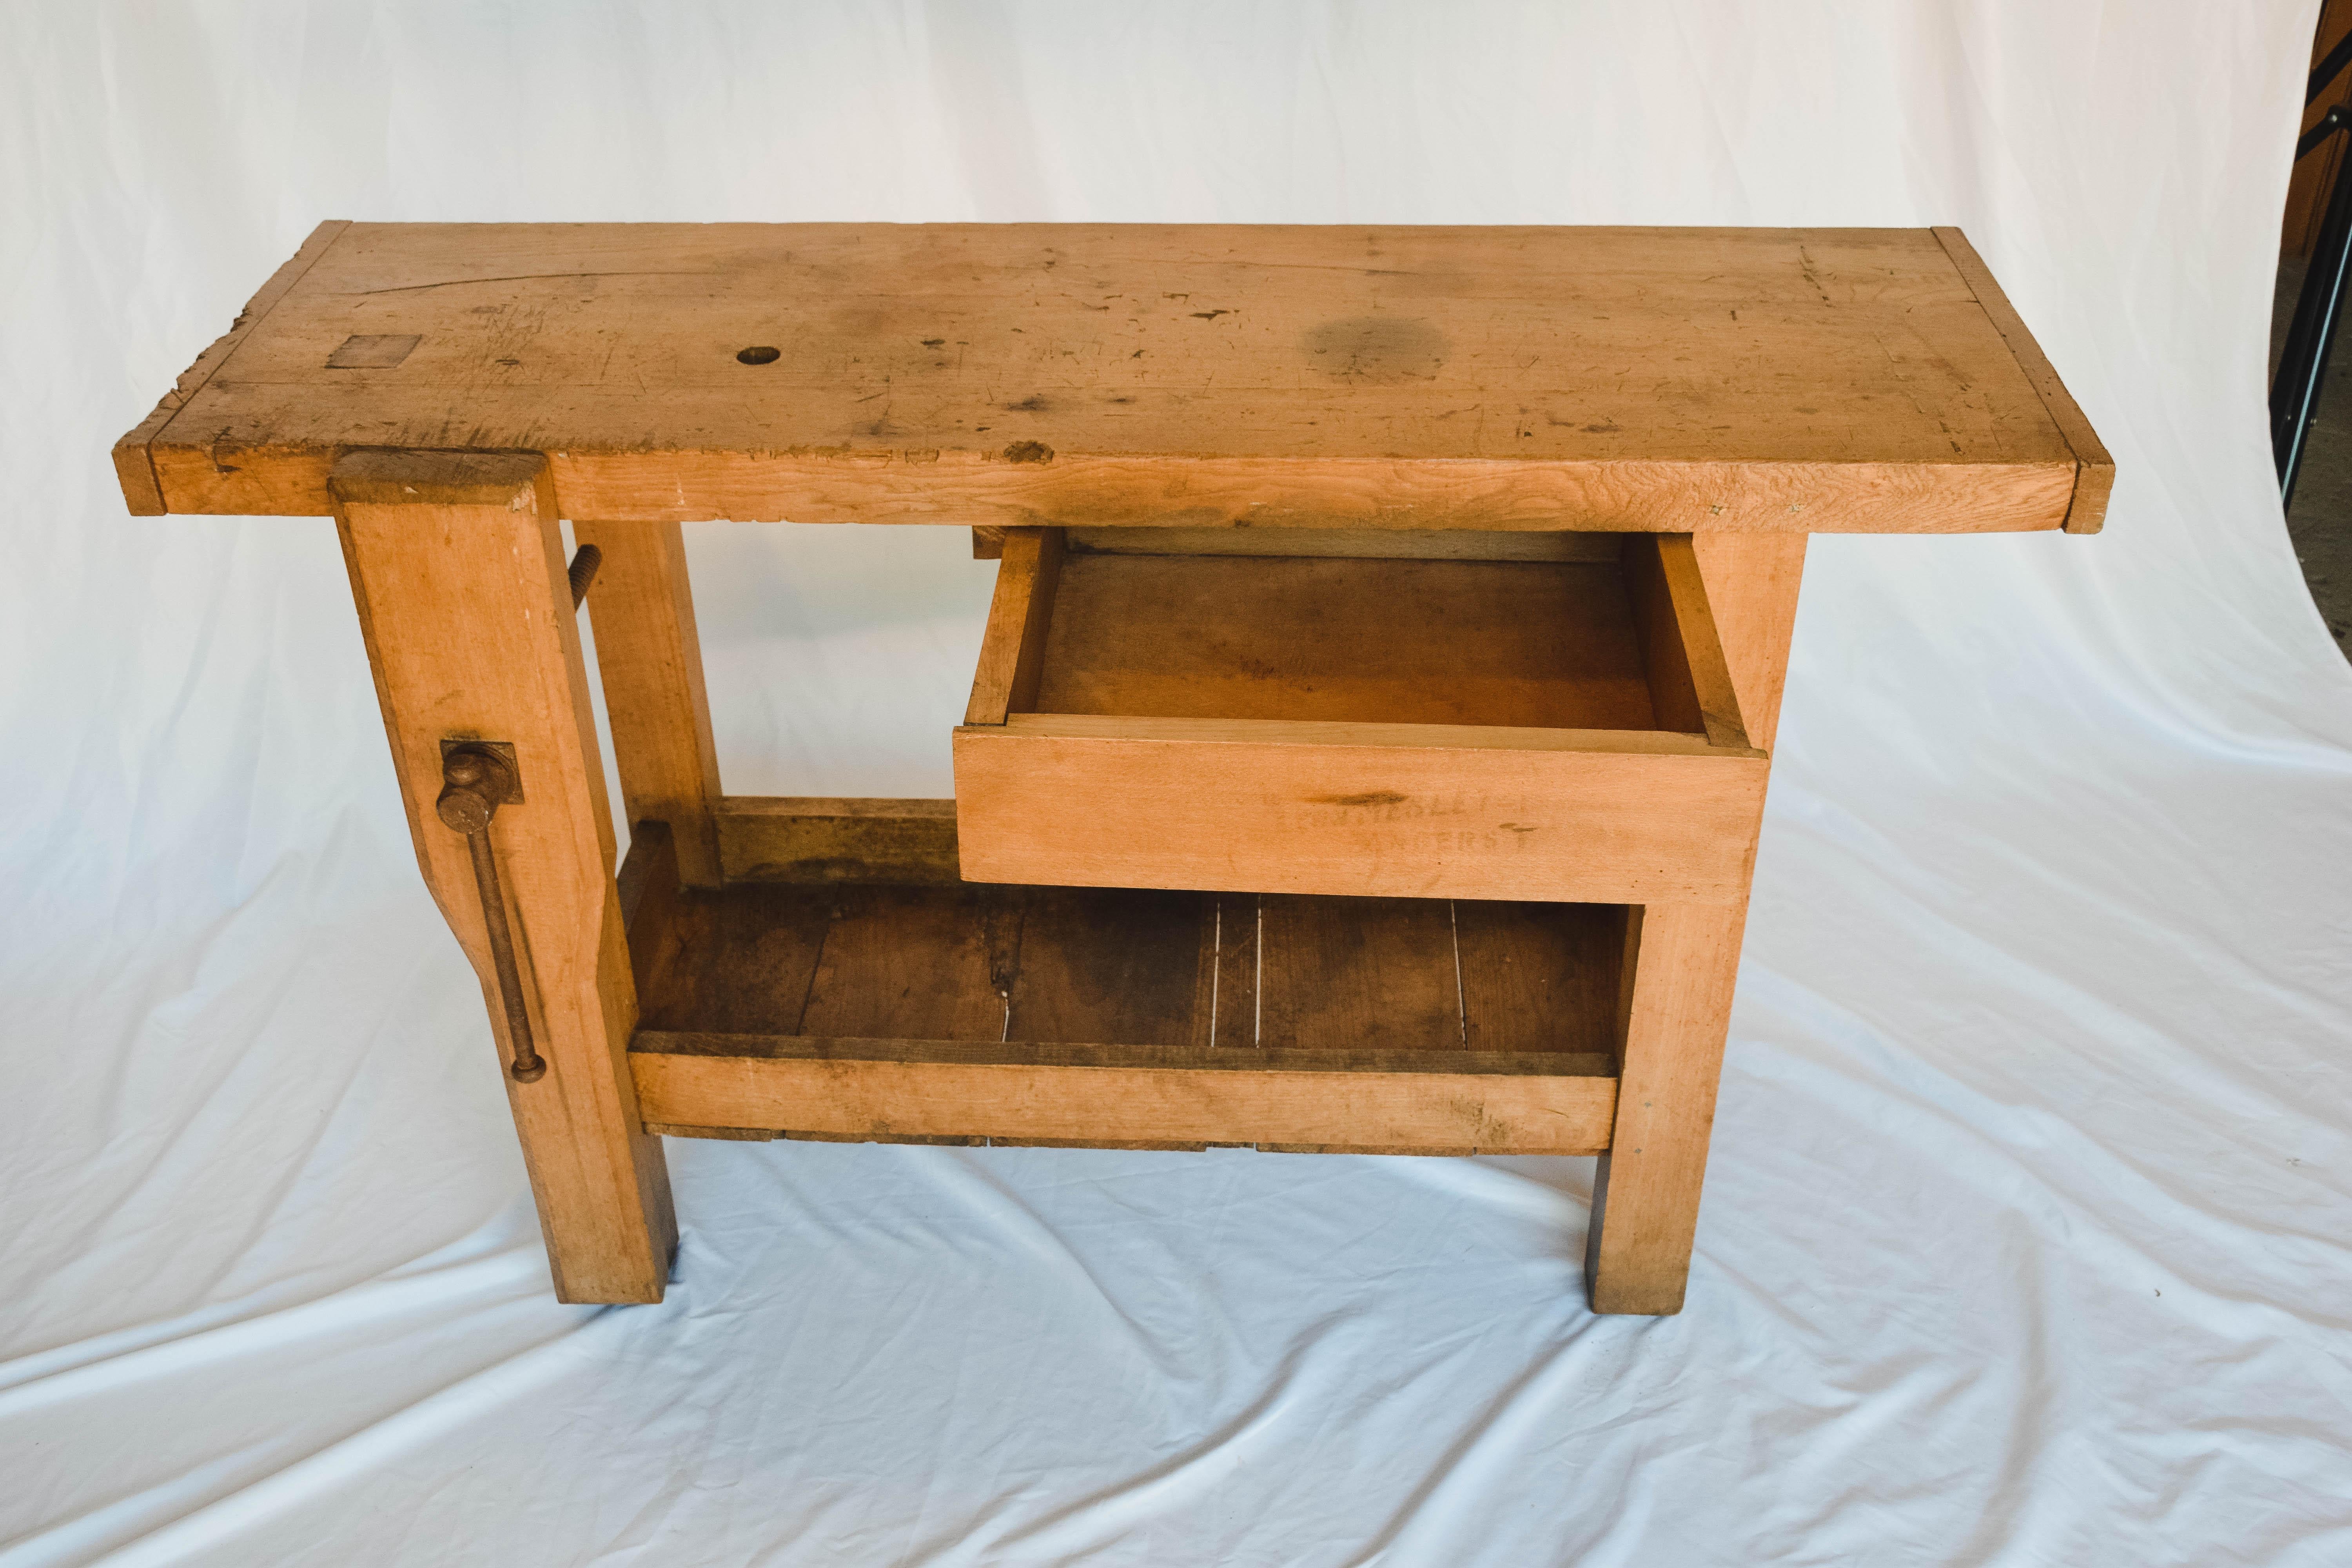 This work table provides a sturdy work space or an interesting way to display collectibles. It has a lower shelf and one drawer. At home in a workroom or a family room, this table provides form and function.